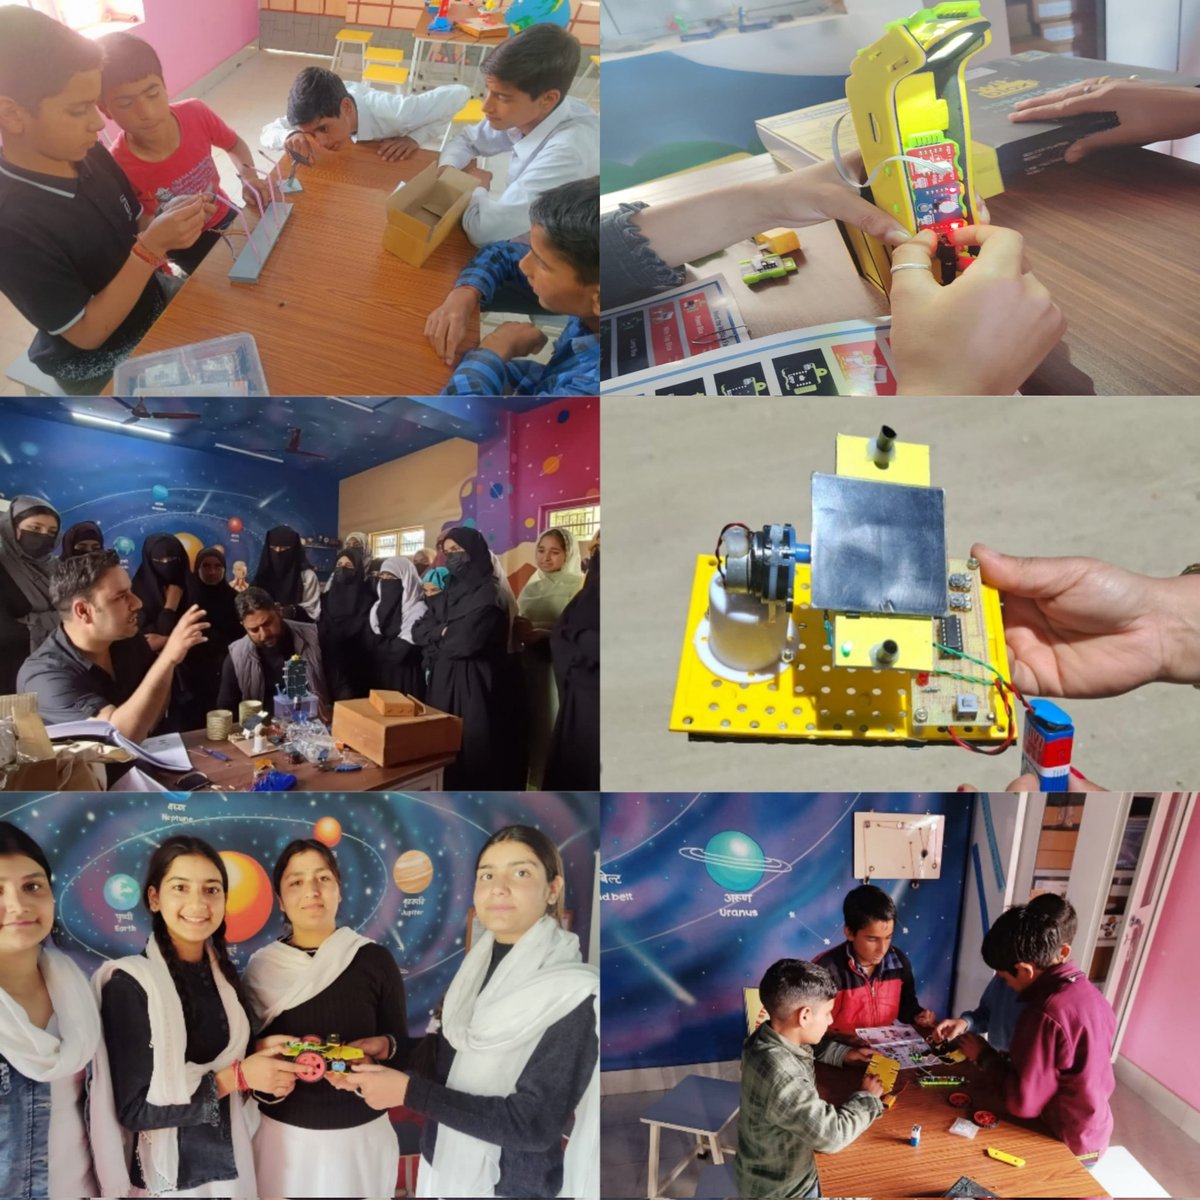 _From Schools to Startups: Igniting Young Minds to Innovate_ Week-long Campaign on National Technology Day with Renewable Energy Models organized in Kishtwar; Workshops held in STEM Labs of 10 Schools. @Devansh_IAS @diprjk